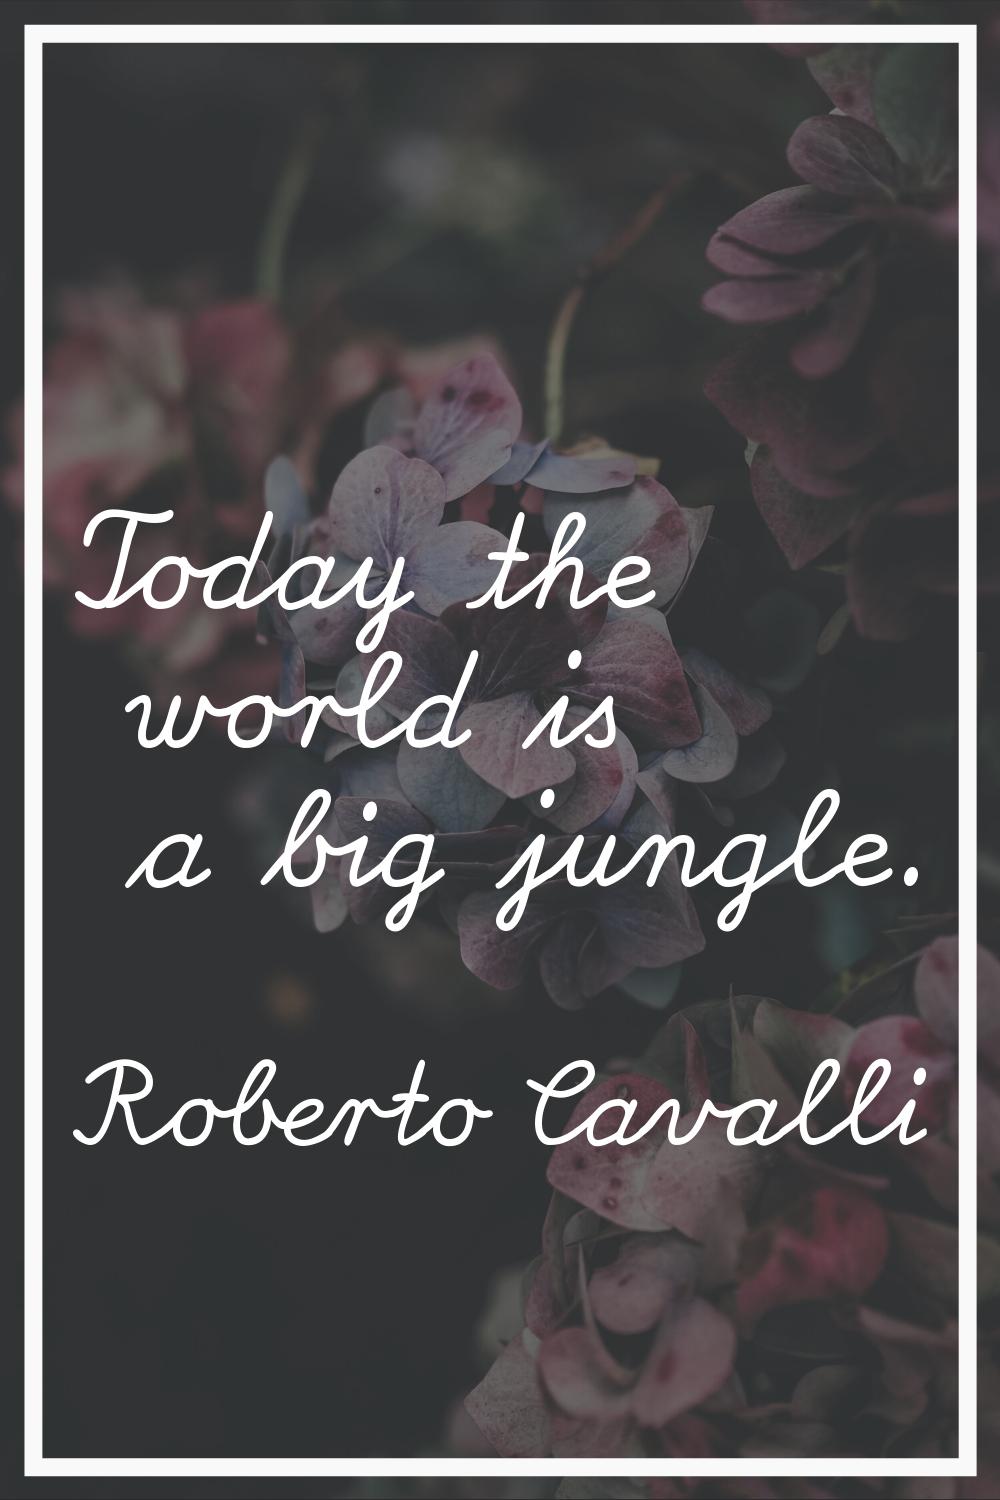 Today the world is a big jungle.